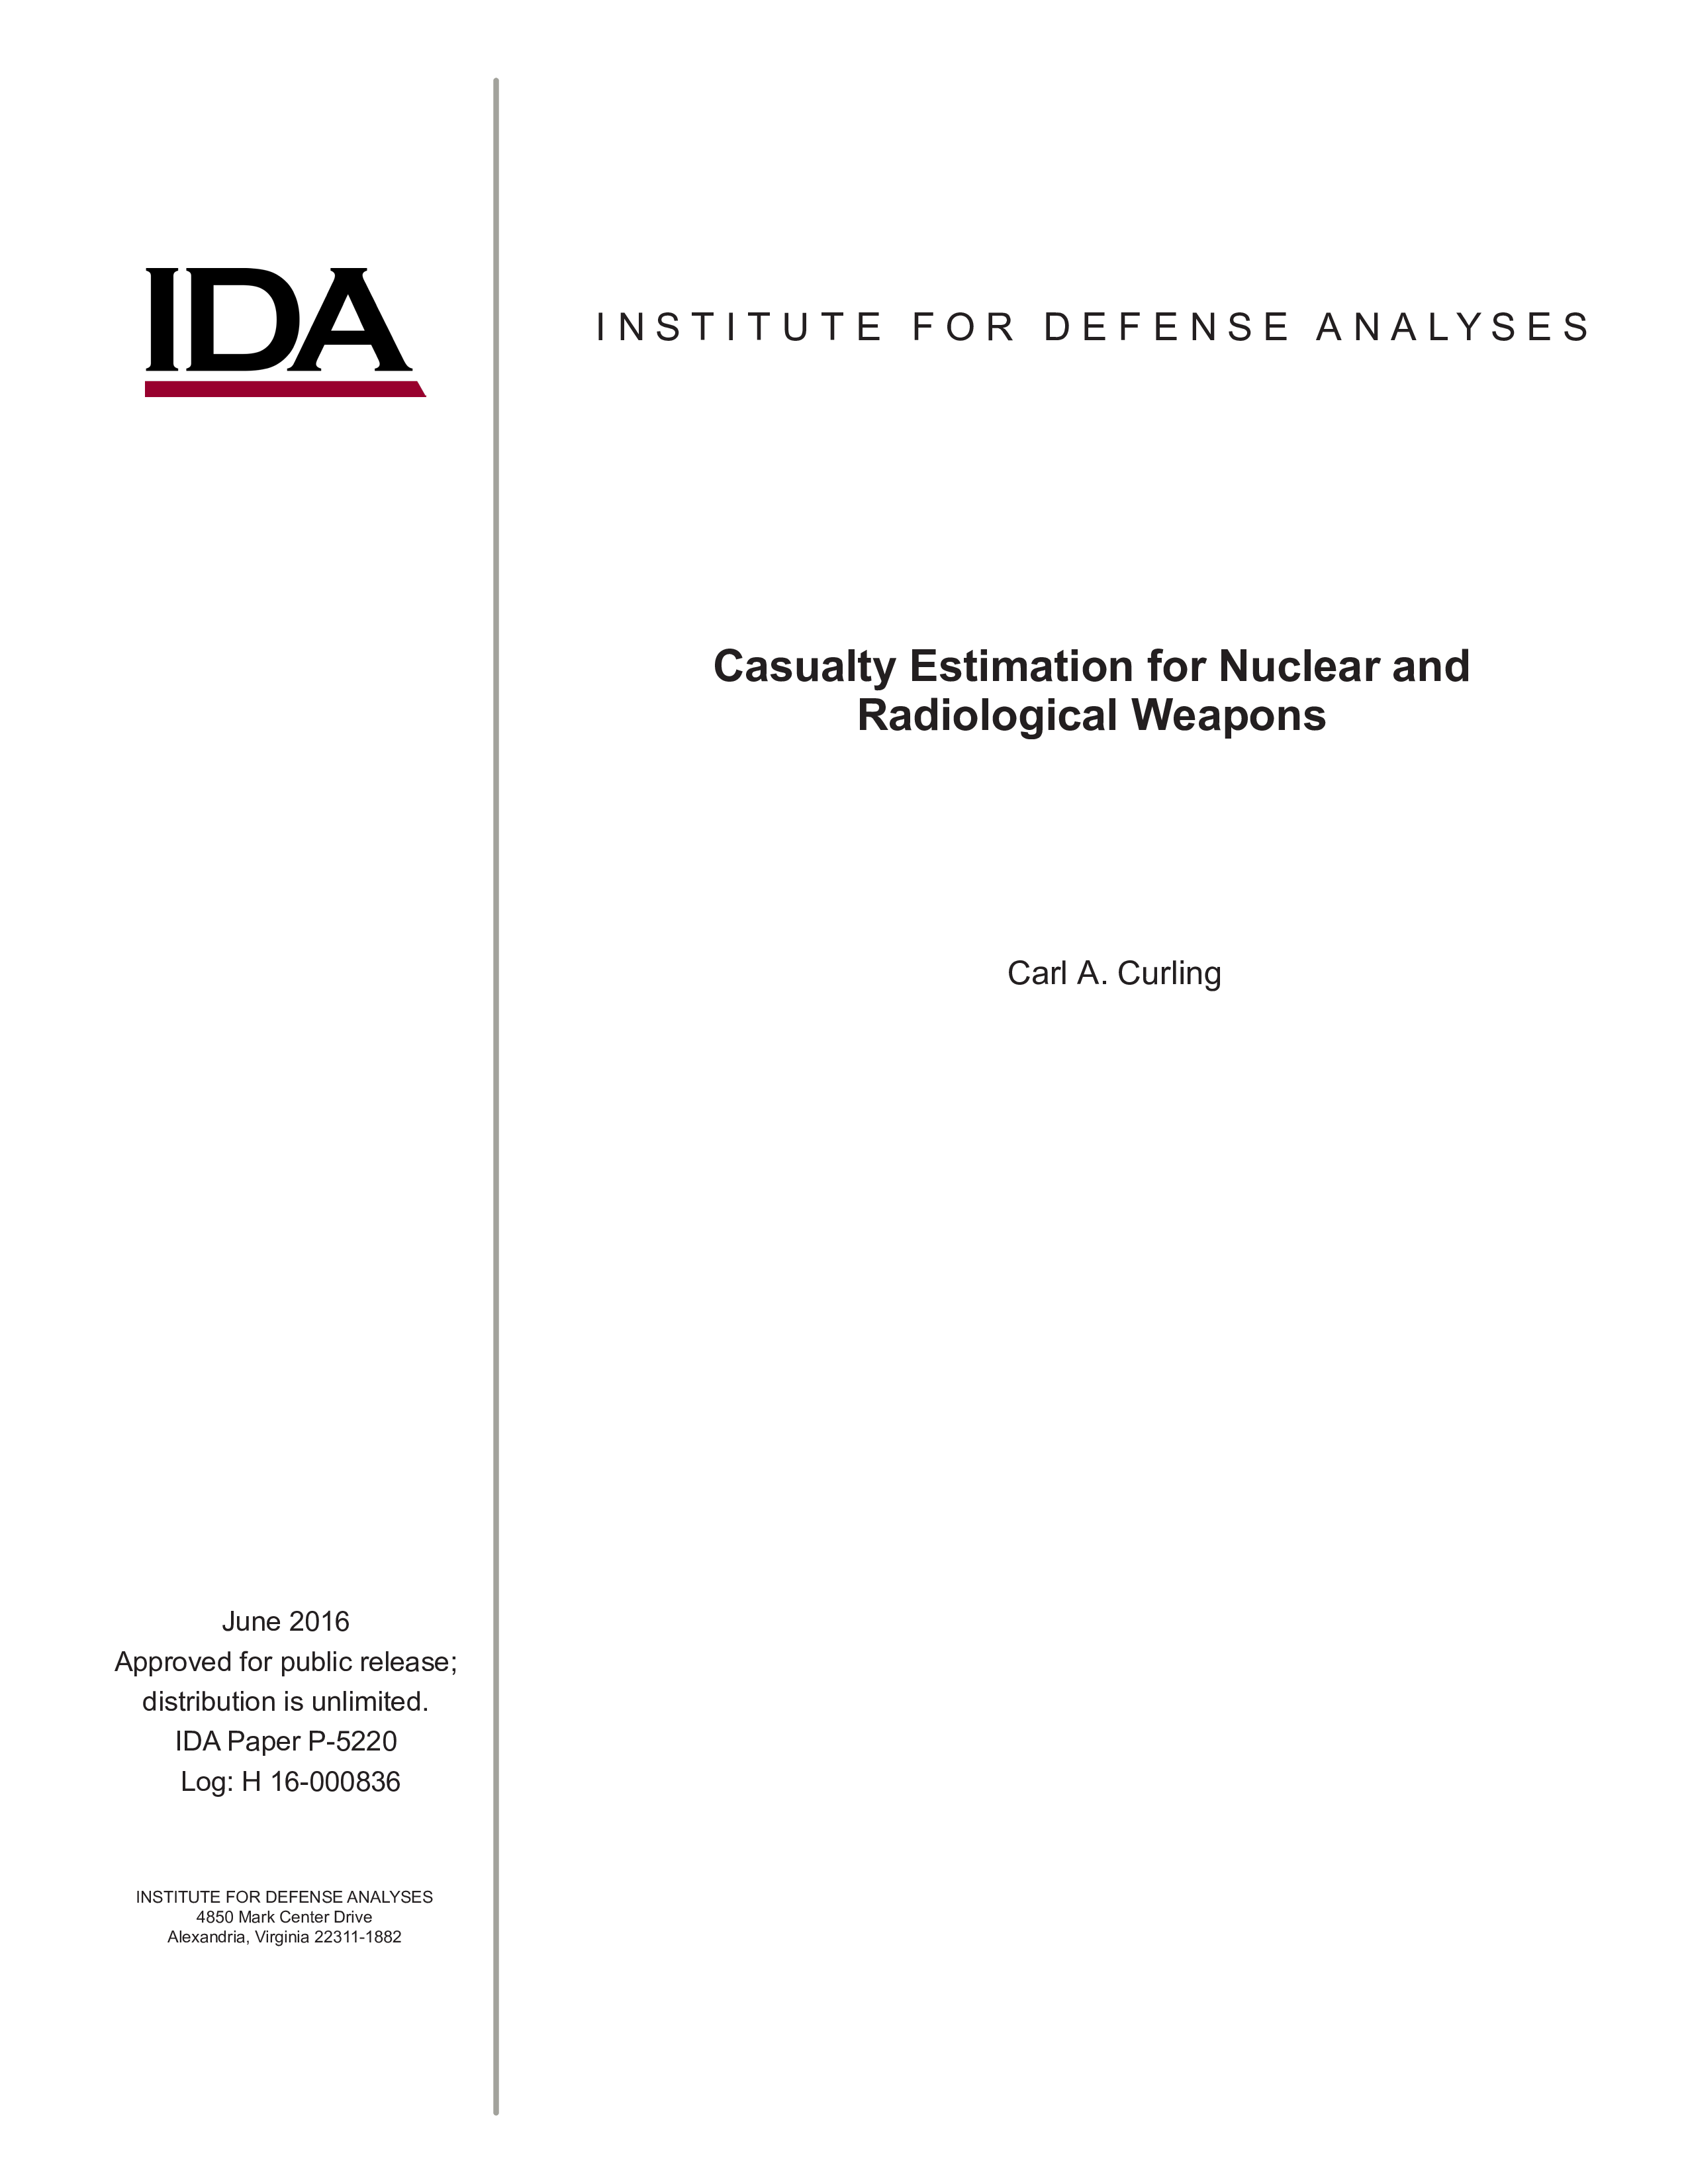 Casualty Estimation for Nuclear and Radiological Weapons